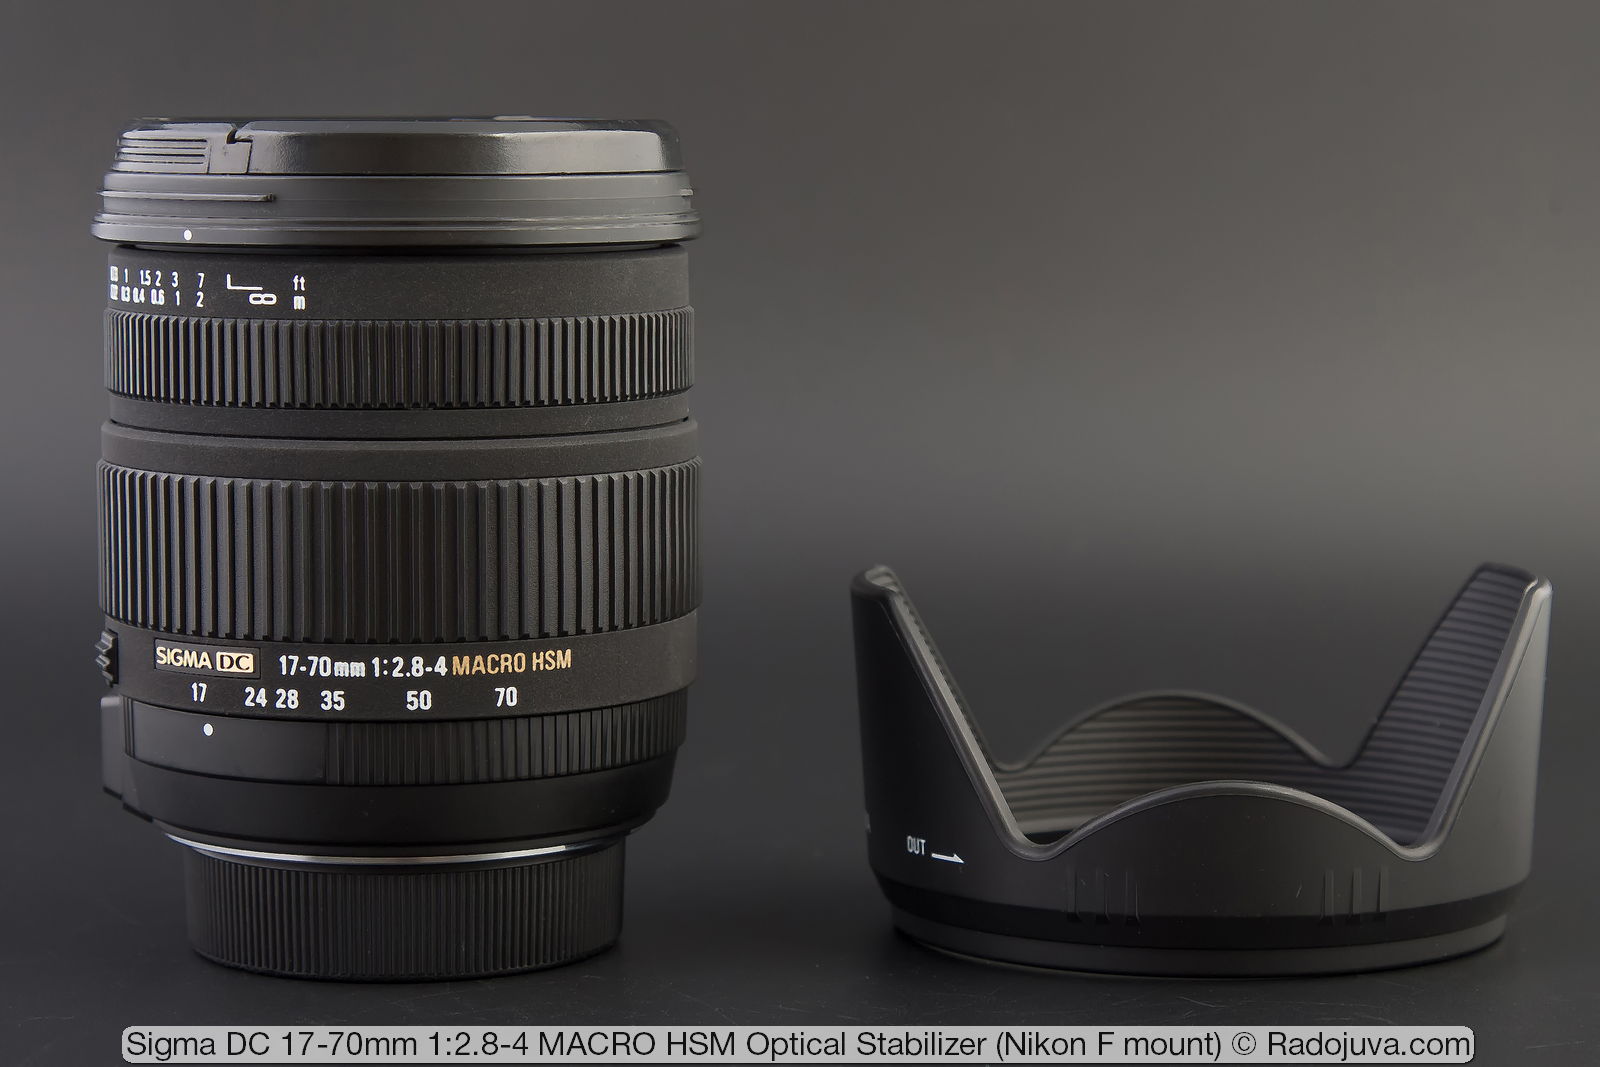 Sigma DC 17-70mm 1: 2.8-4 MACRO HSM Optical Stabilizer Review | Happy